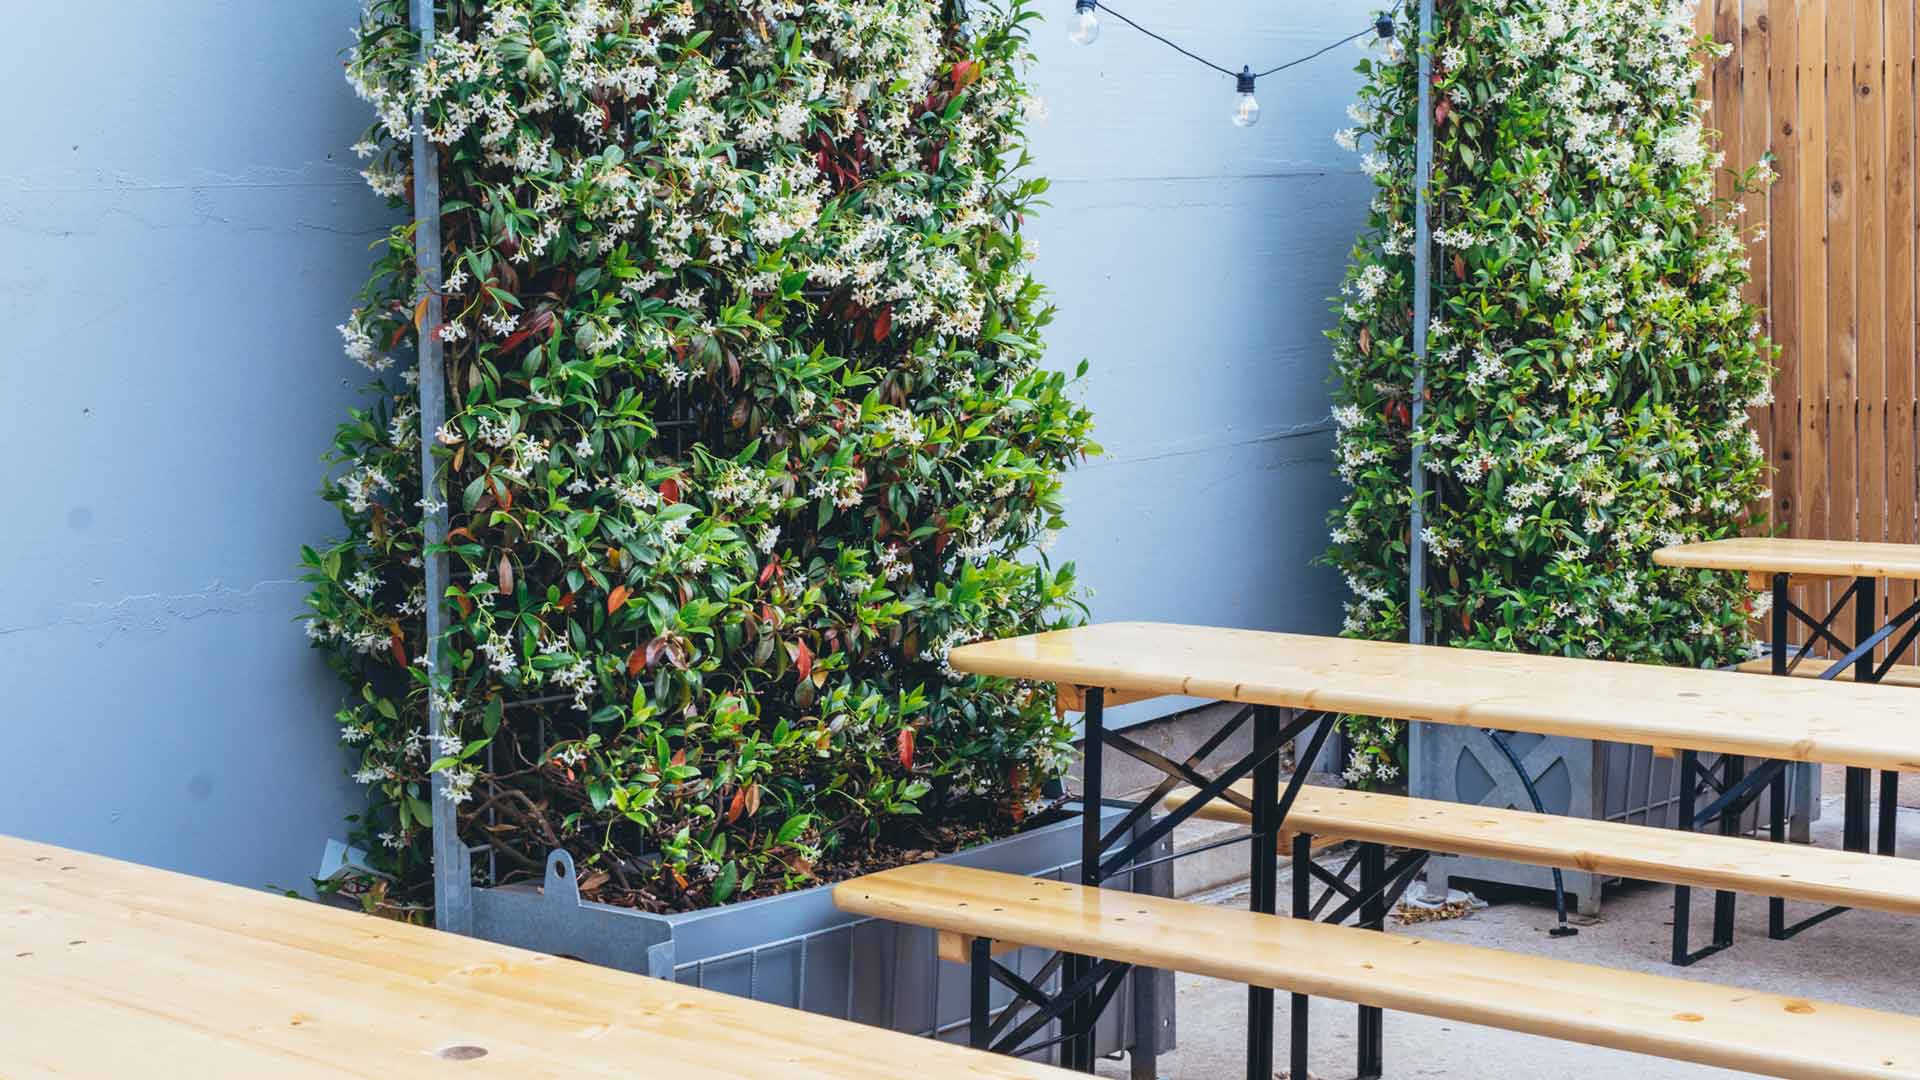 Brisbane's Cult-Favourite Range Brewing Has Quietly Opened a Melbourne Taproom